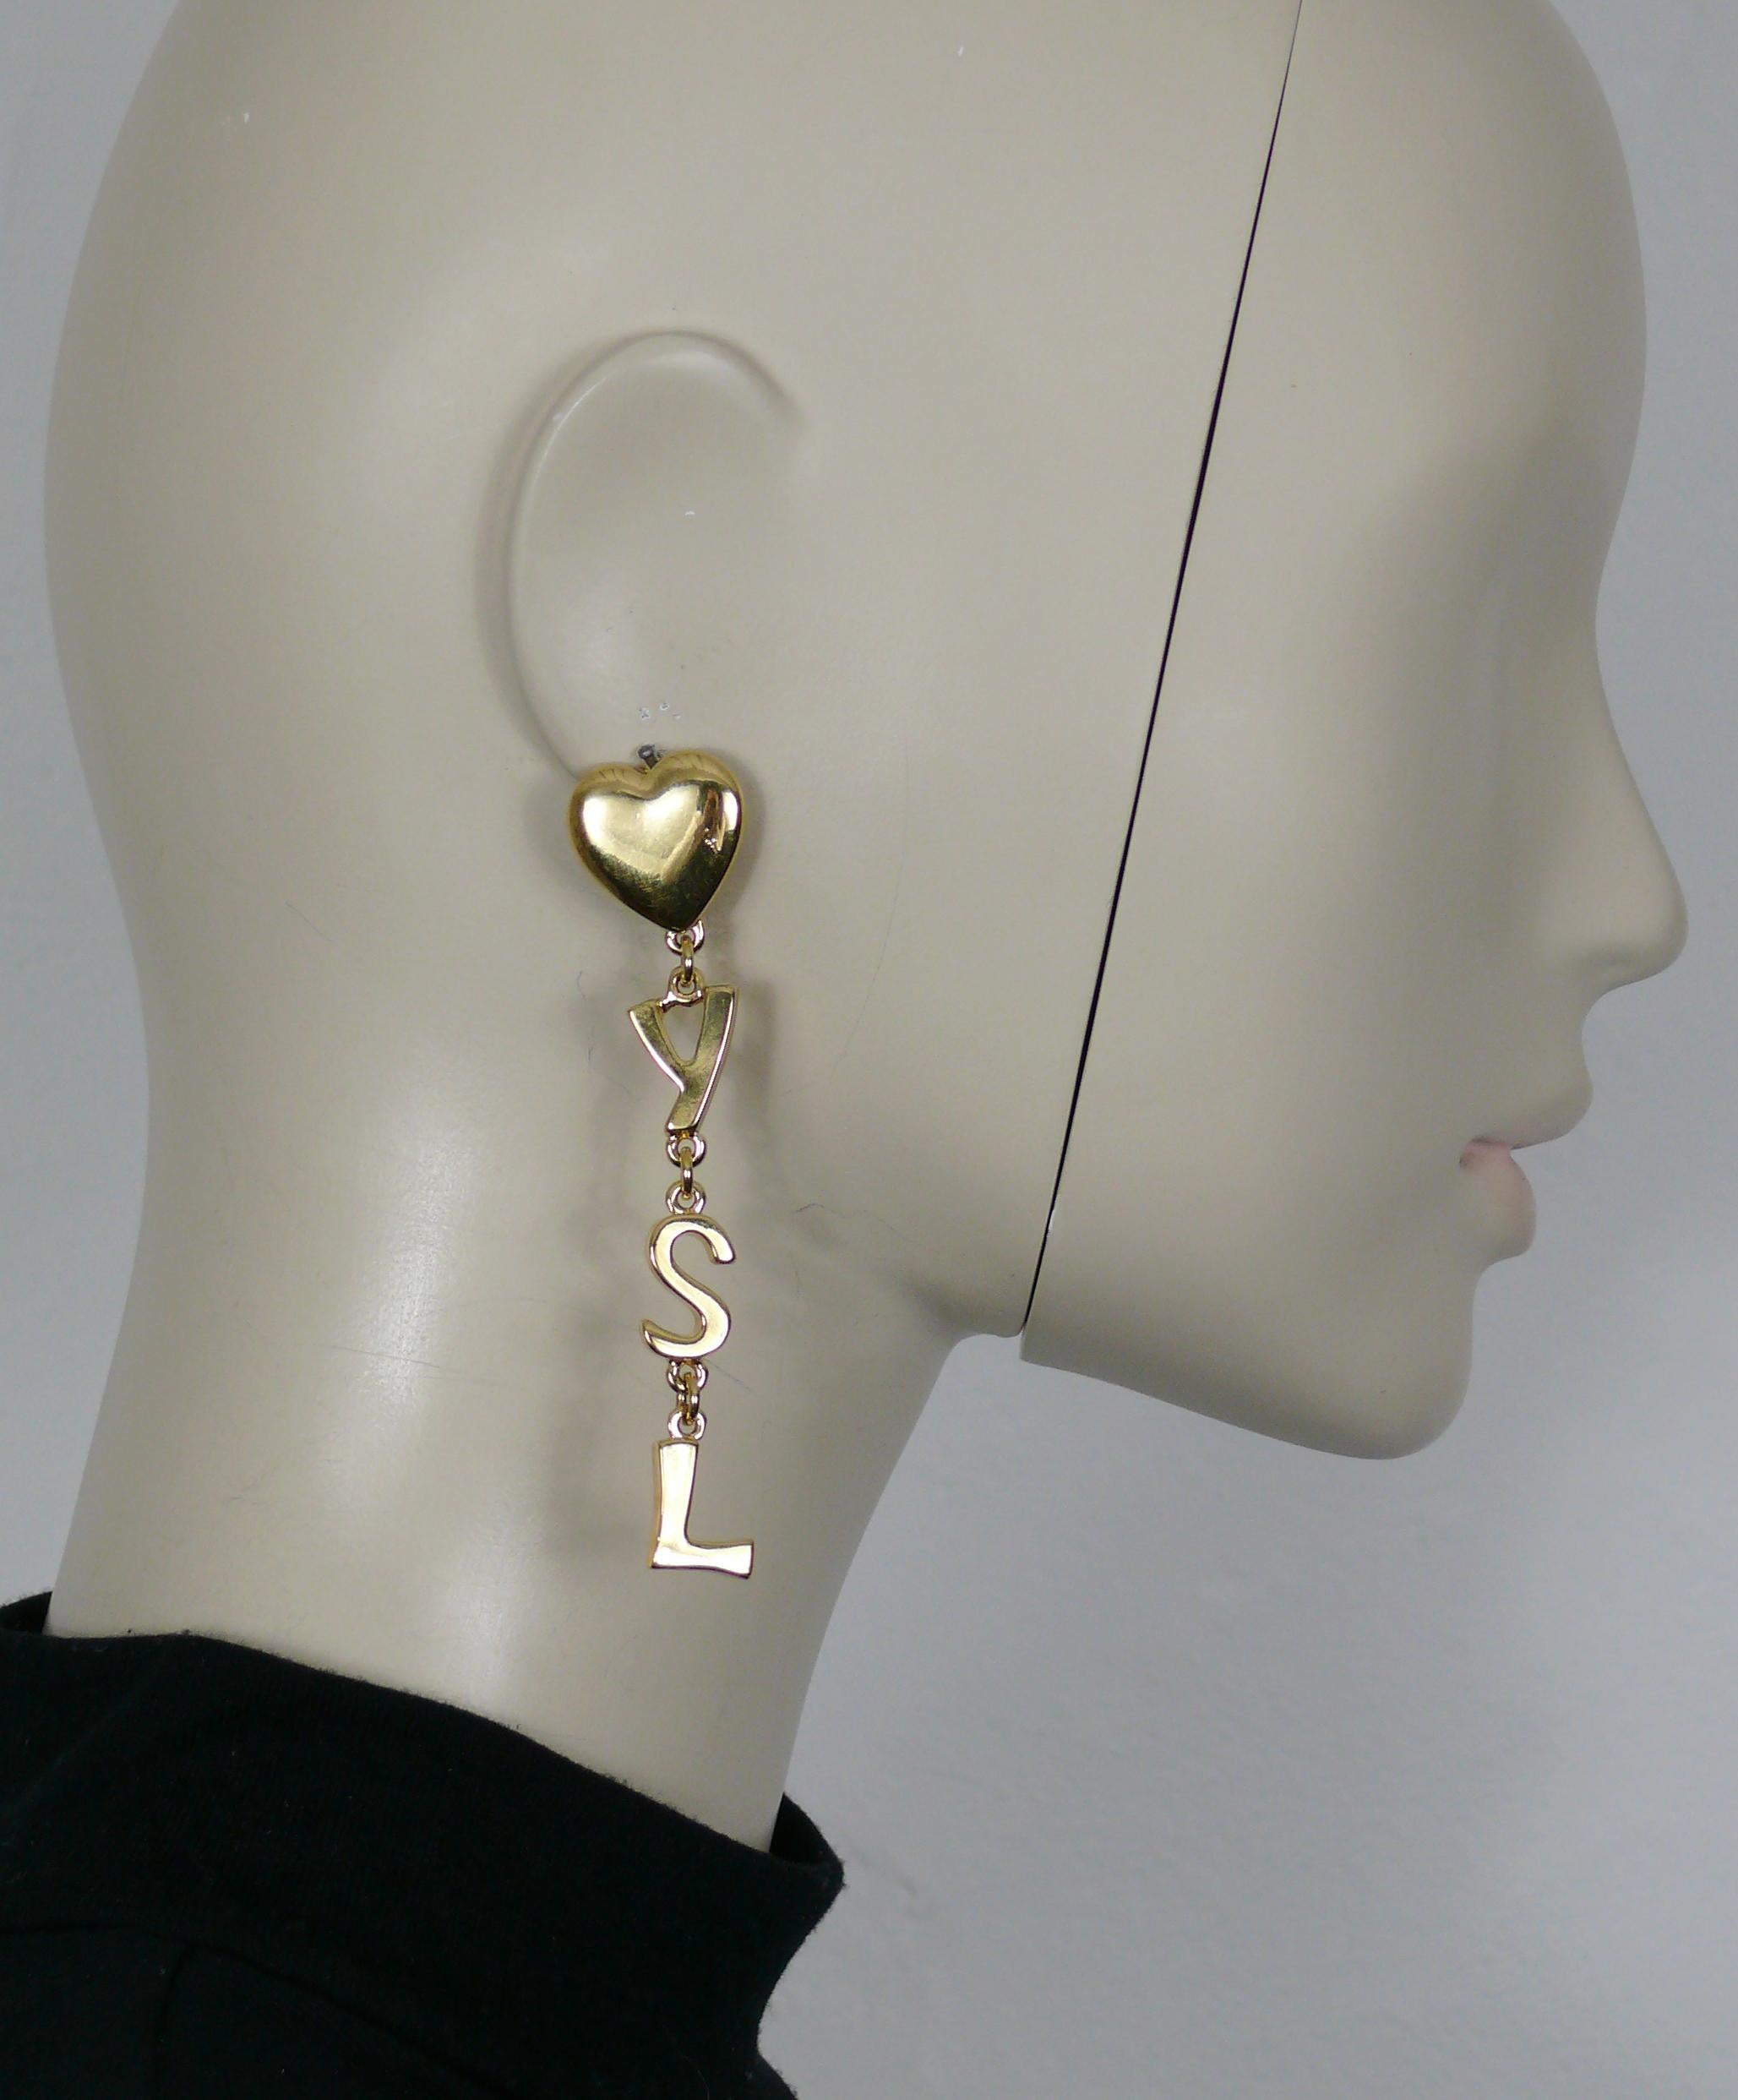 YVES SAINT LAURENT vintage iconic gold toned initials dangling earrings (clip-on).

Marked YSL Made in France.

Indicative measurements : height approx. 9 cm (3.54 inches) / max. width approx. 2 cm (0.79 inch).

Weight per earring : approx. 14